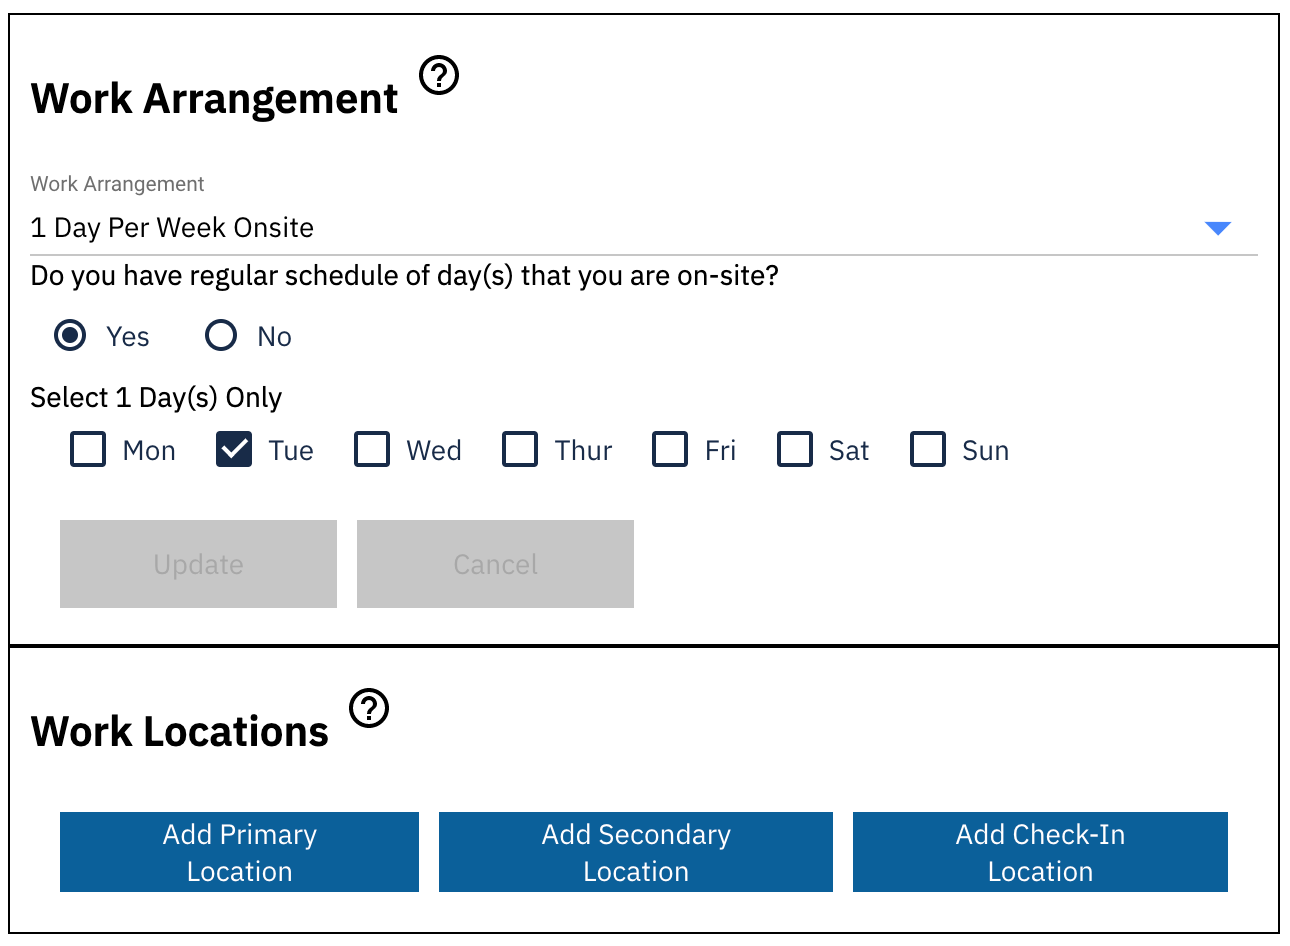 Work location section and buttons to "add primary location," "add secondary location" or "add check-in location"